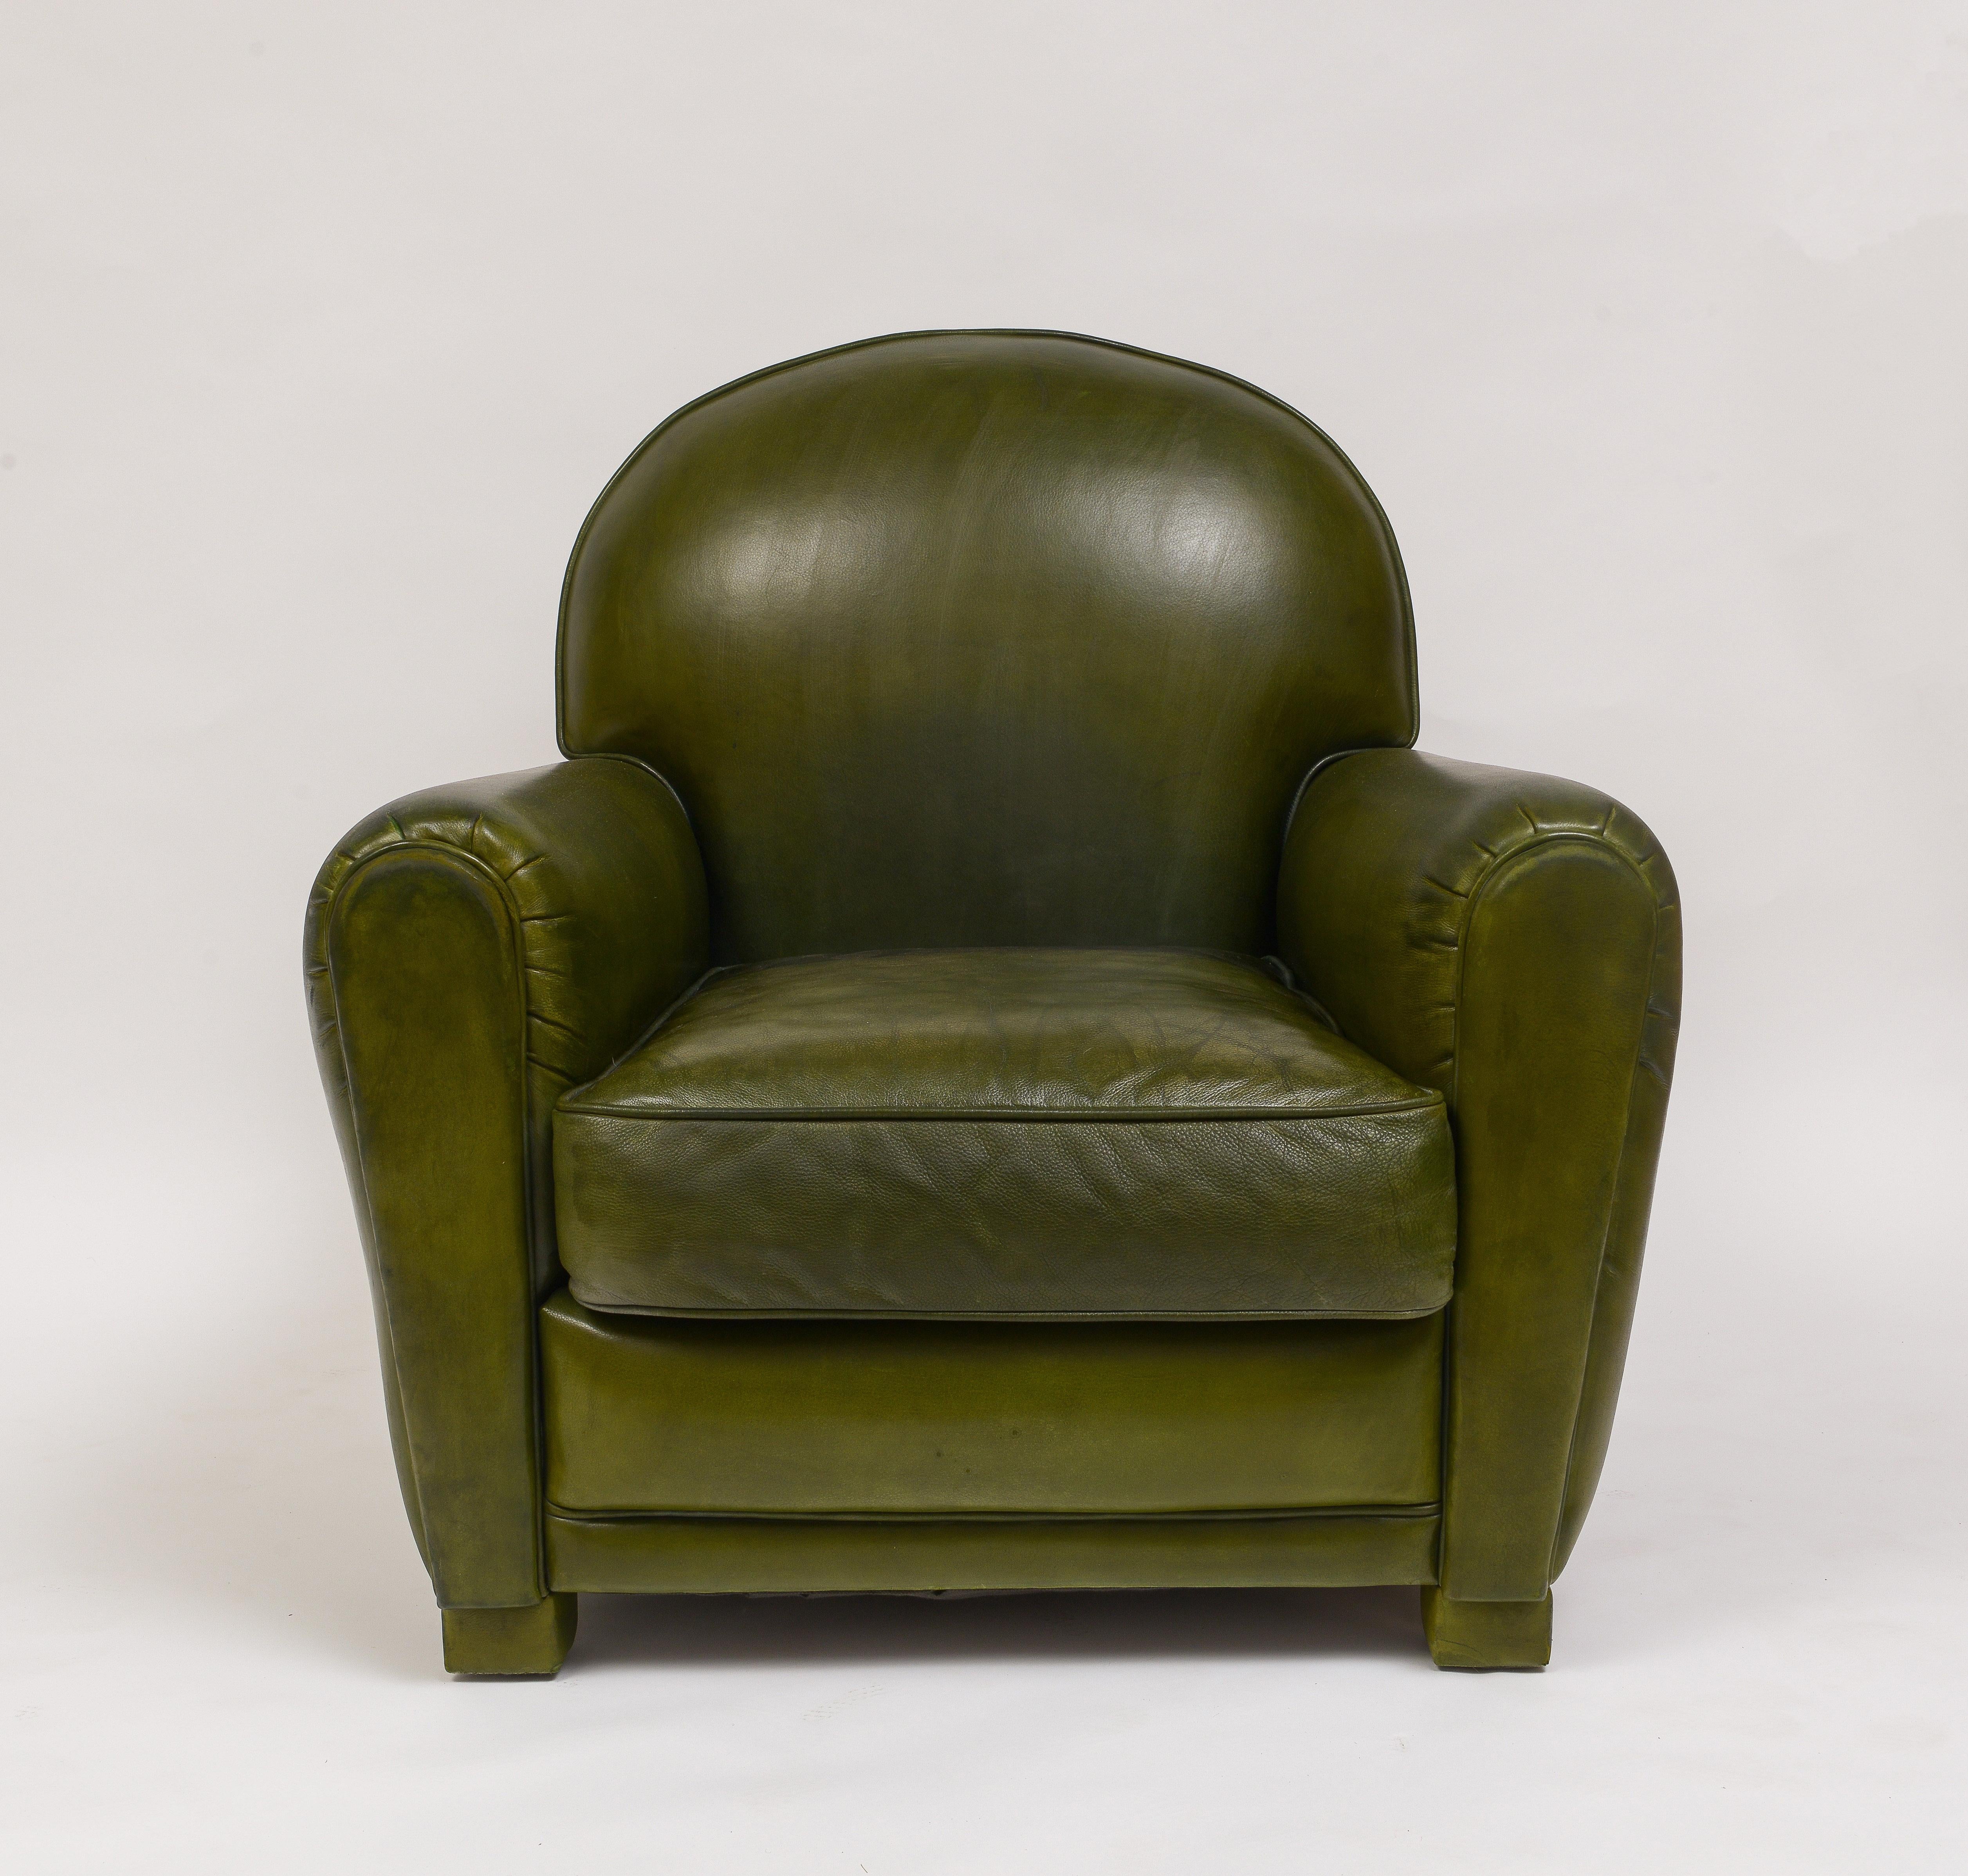 Early 21st Century Green Leather Club Chairs With Ottomans- 4 Pieces For Sale 1